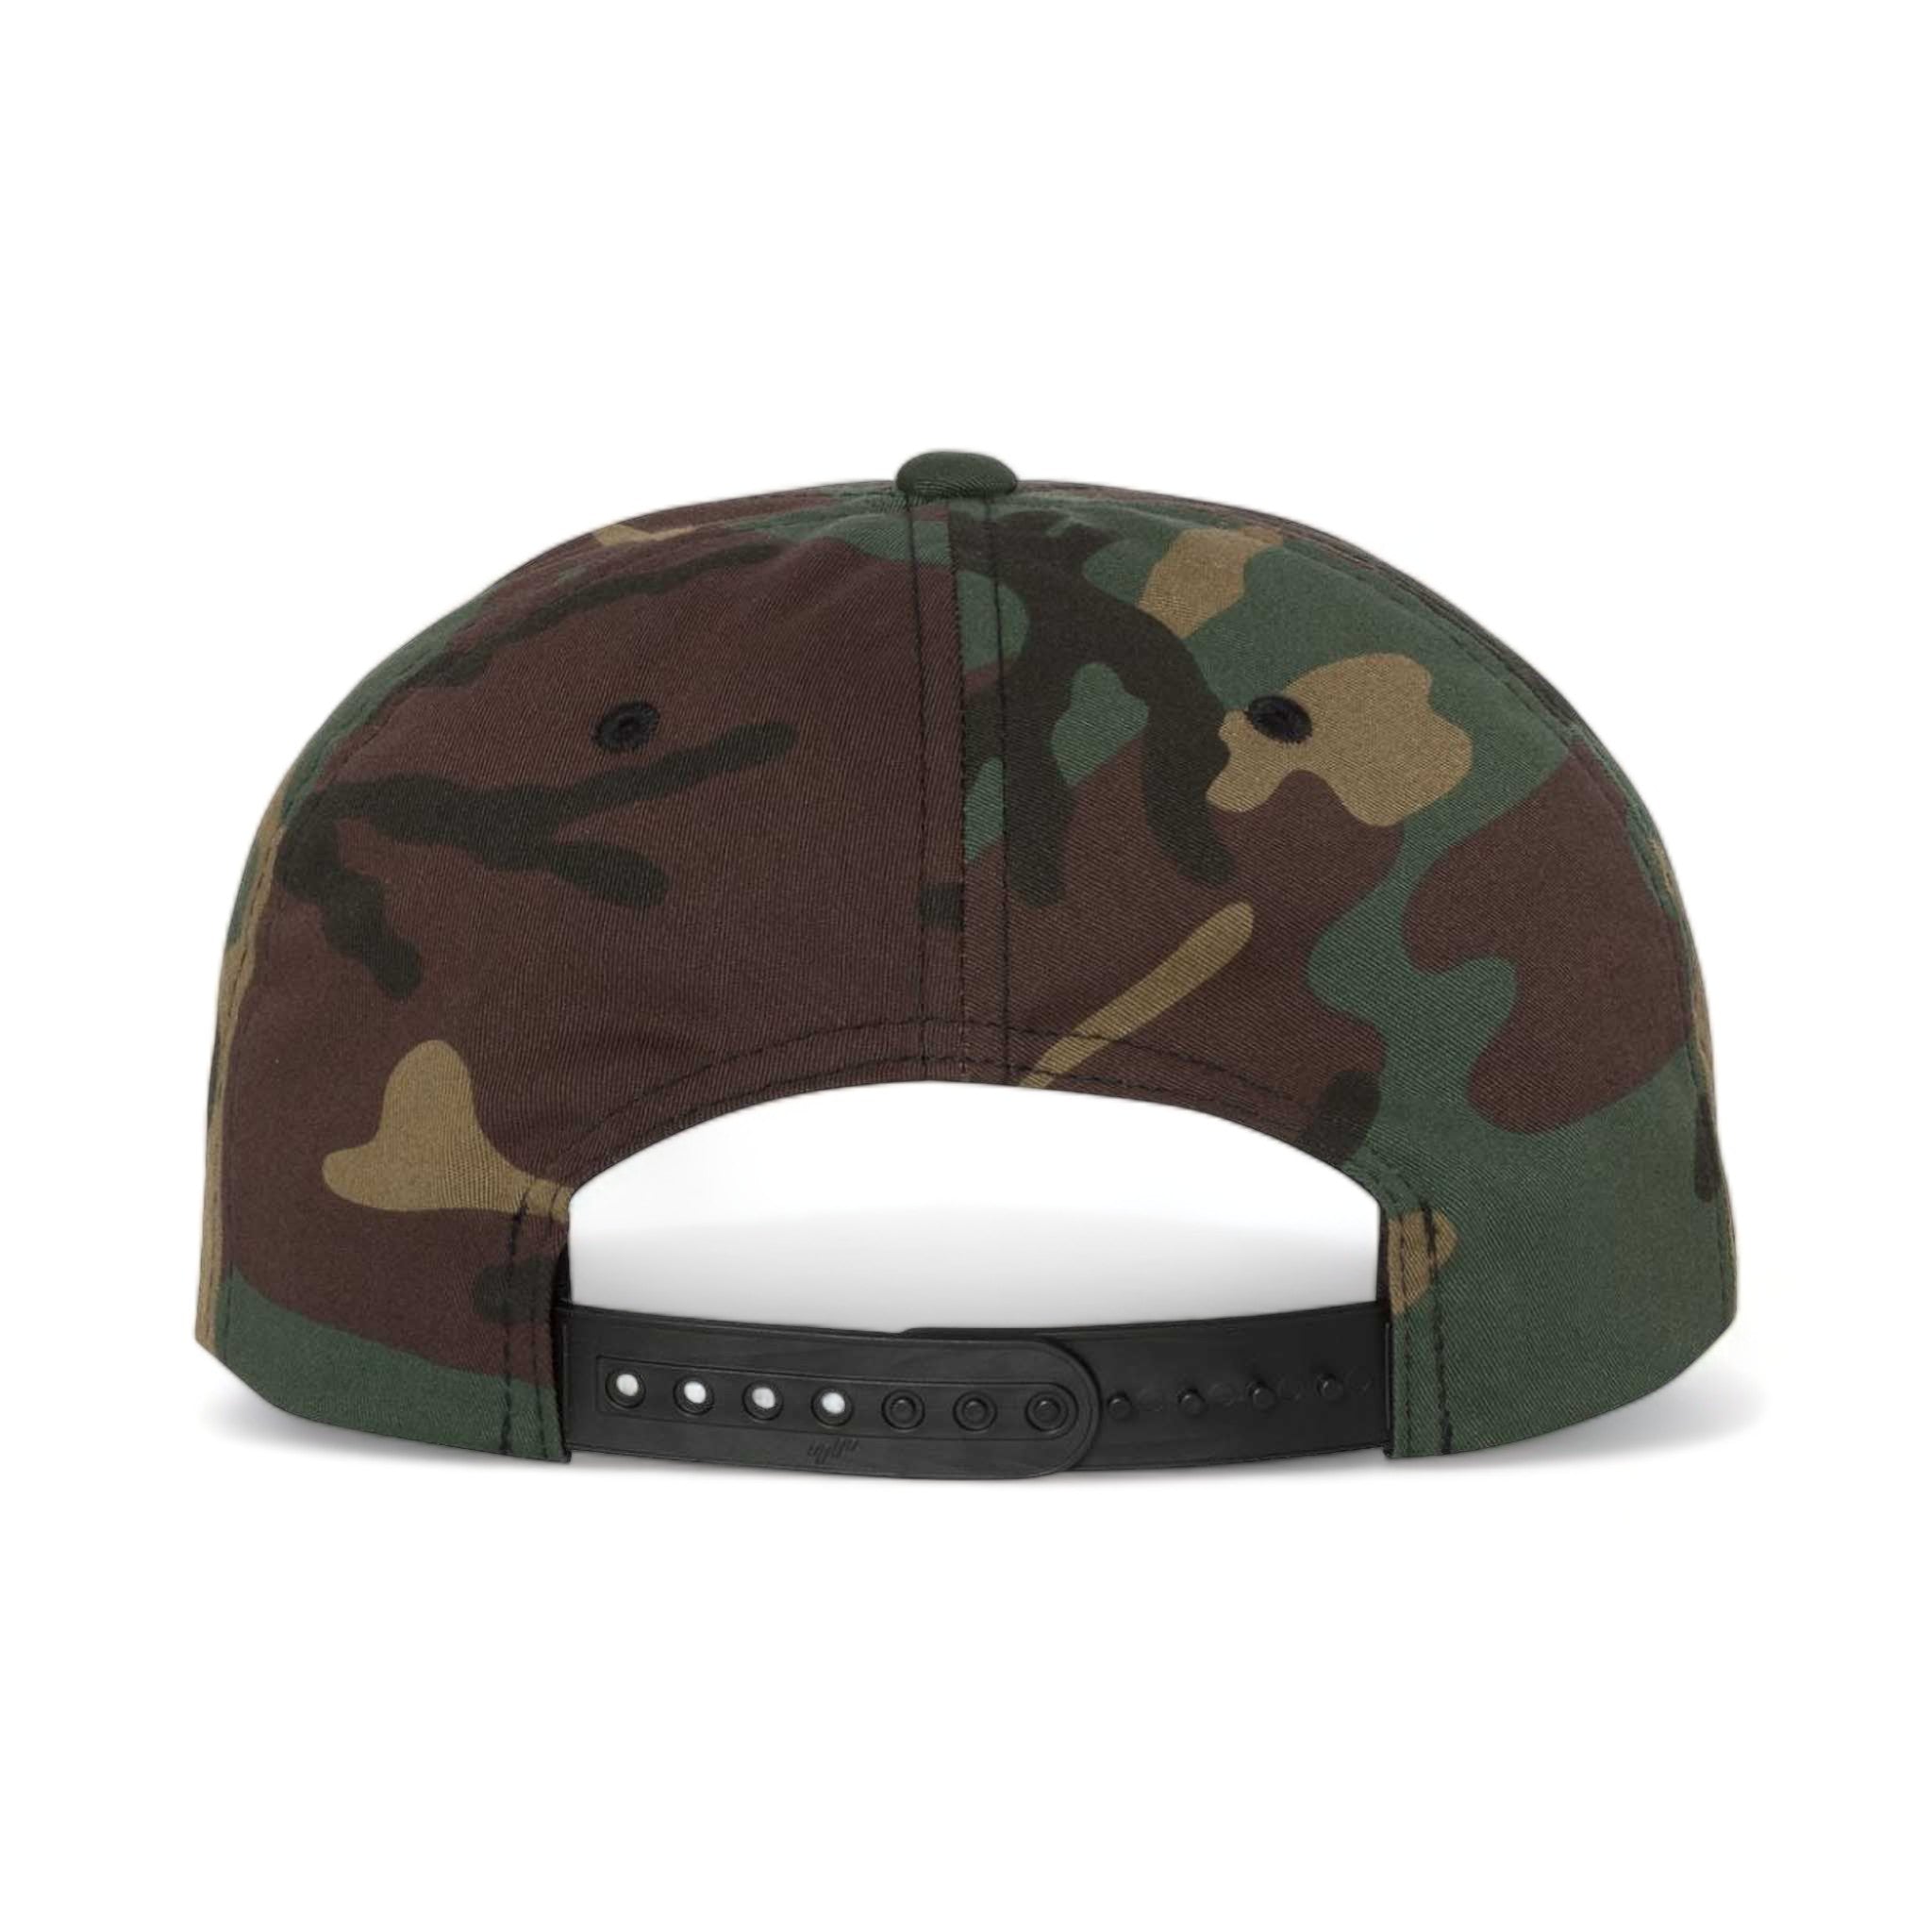 Back view of YP Classics 6089M custom hat in green camo